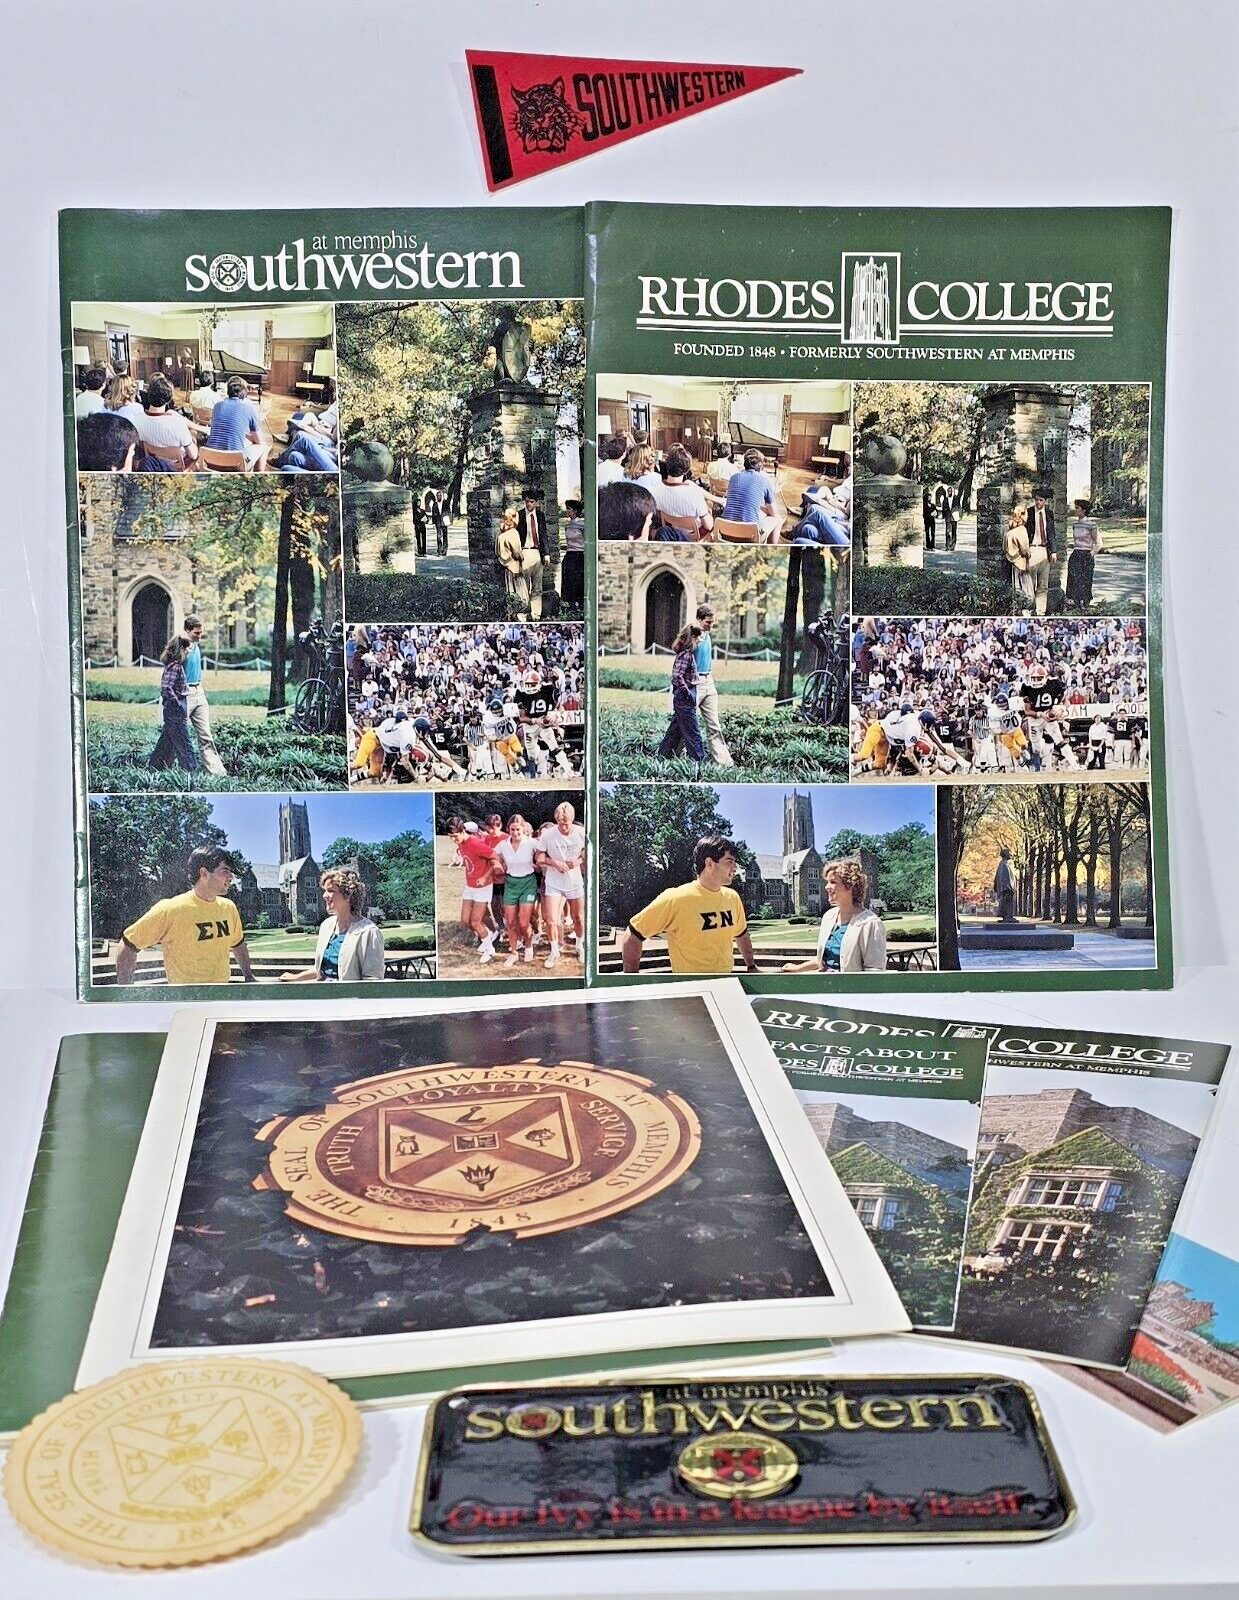 Lot of 13 Materials from 1984 SOUTHWESTERN at MEMPHIS Becomes RHODES COLLEGE